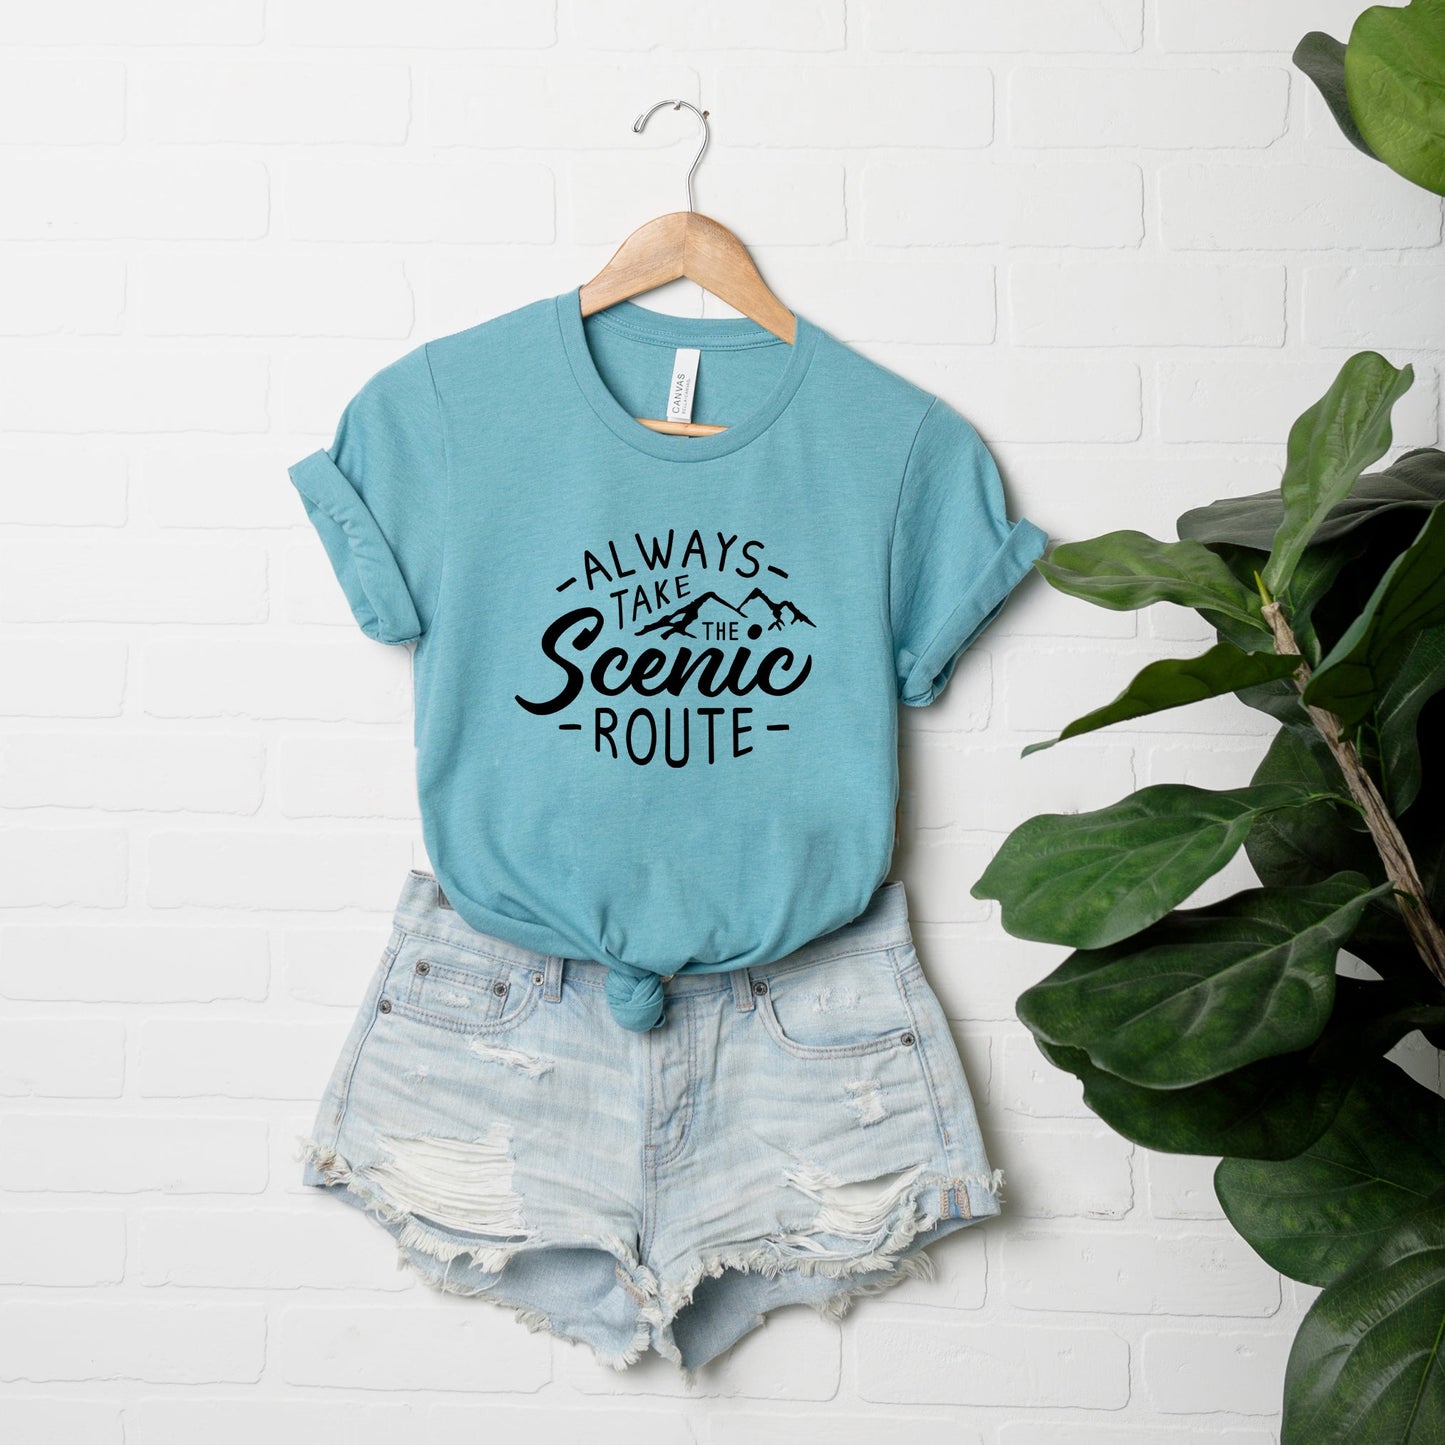 Take The Scenic Route - Words | Short Sleeve Crew Neck